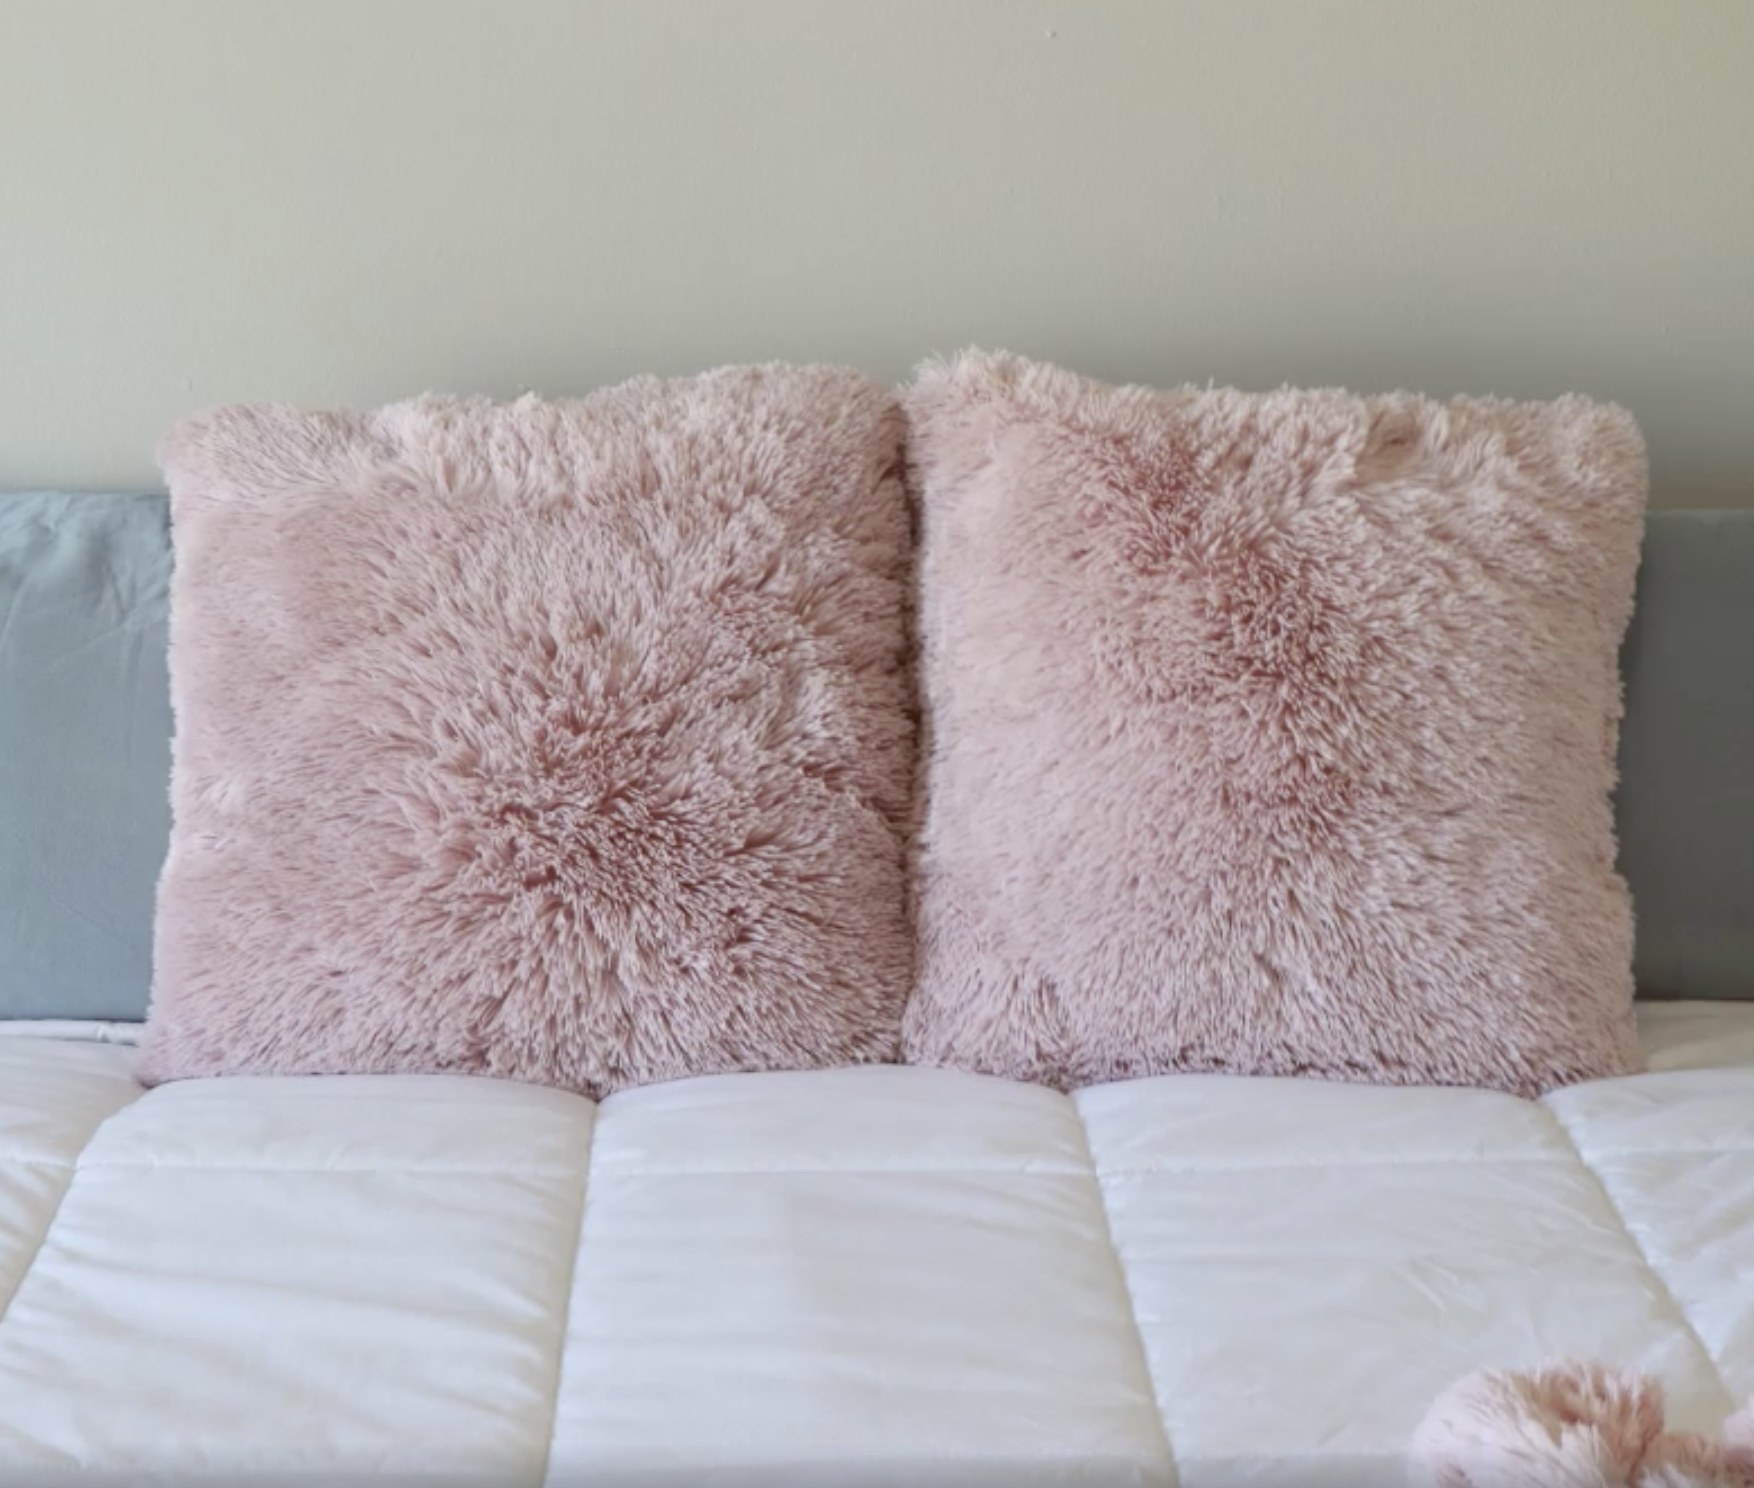 Two pink faux fur throw pillows on a bed